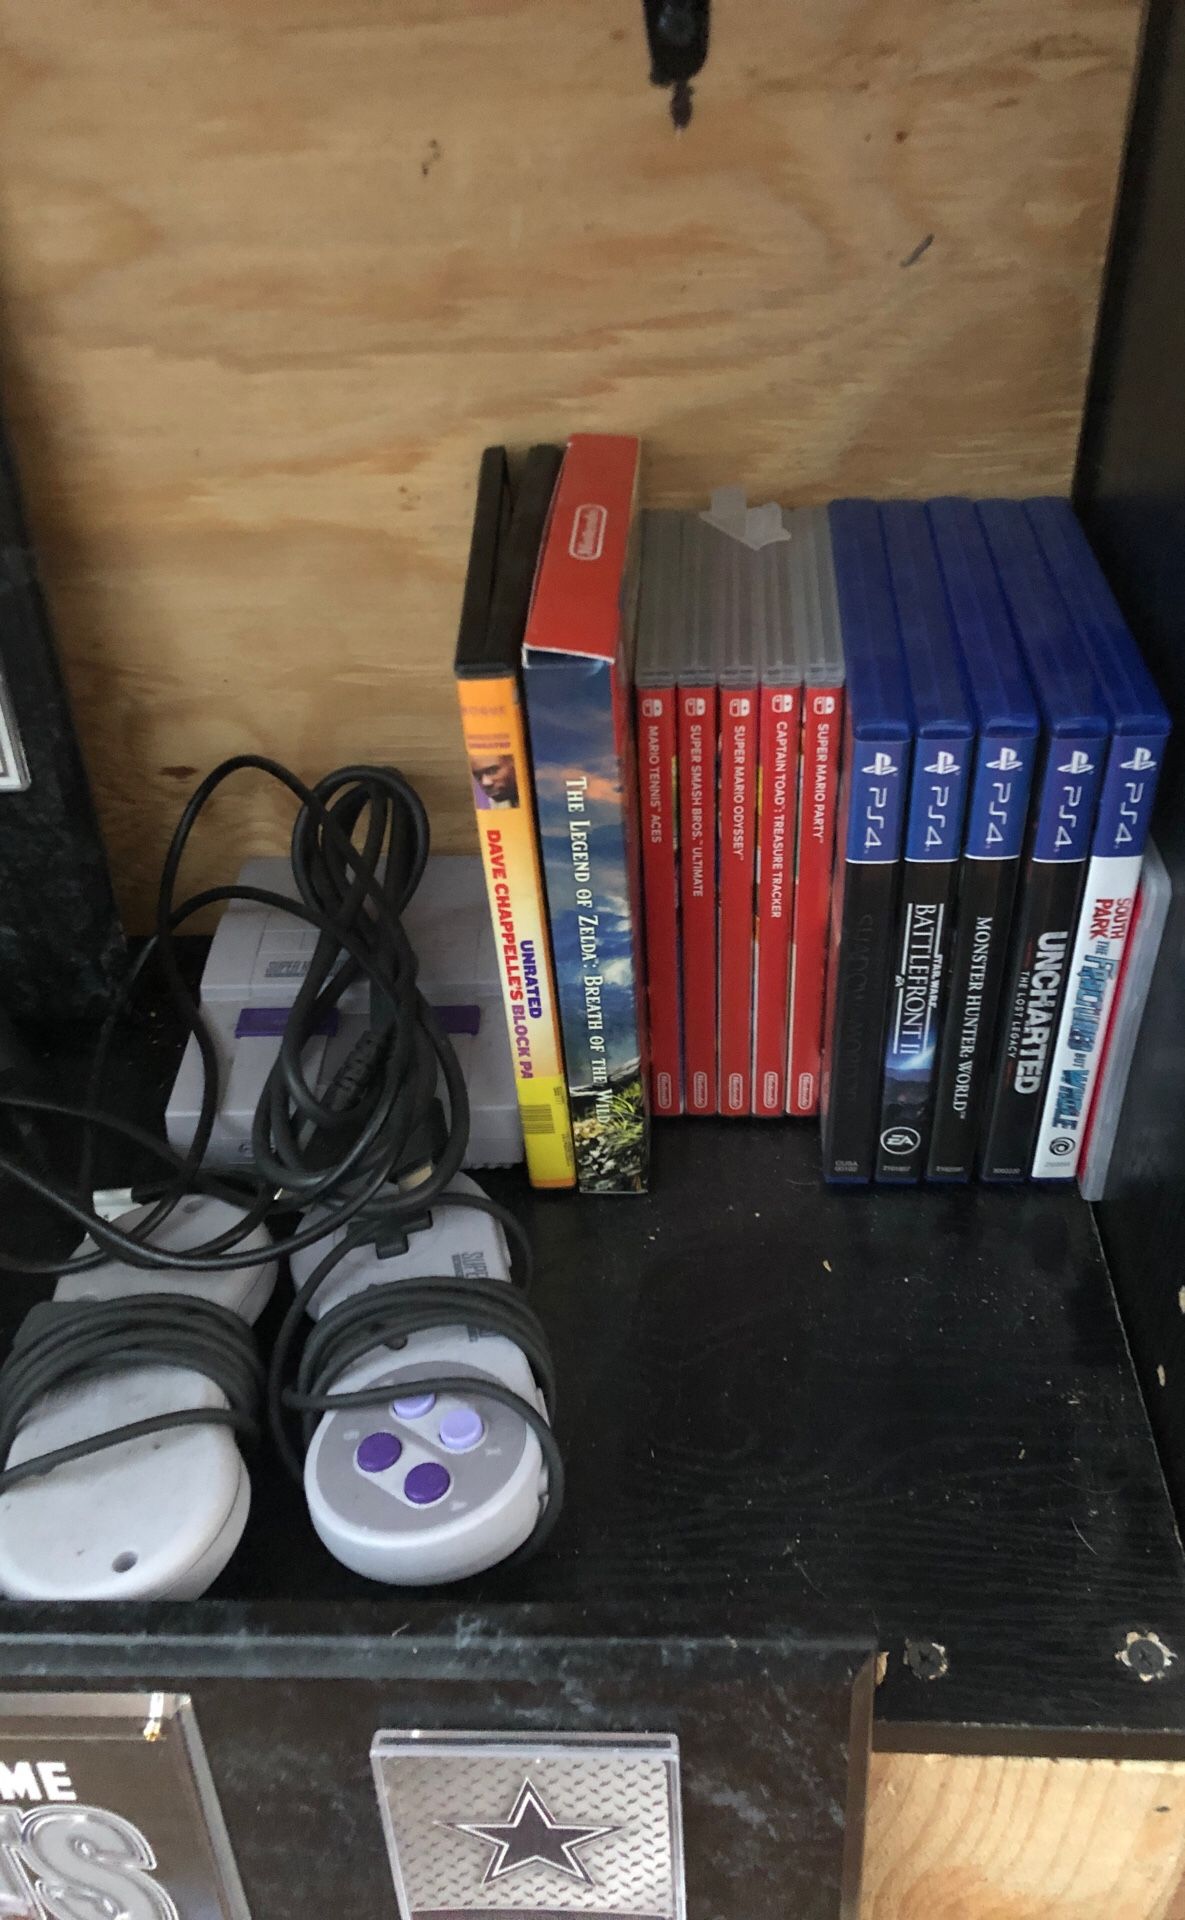 Super nes mini,Nintendo switch games and PS4 games